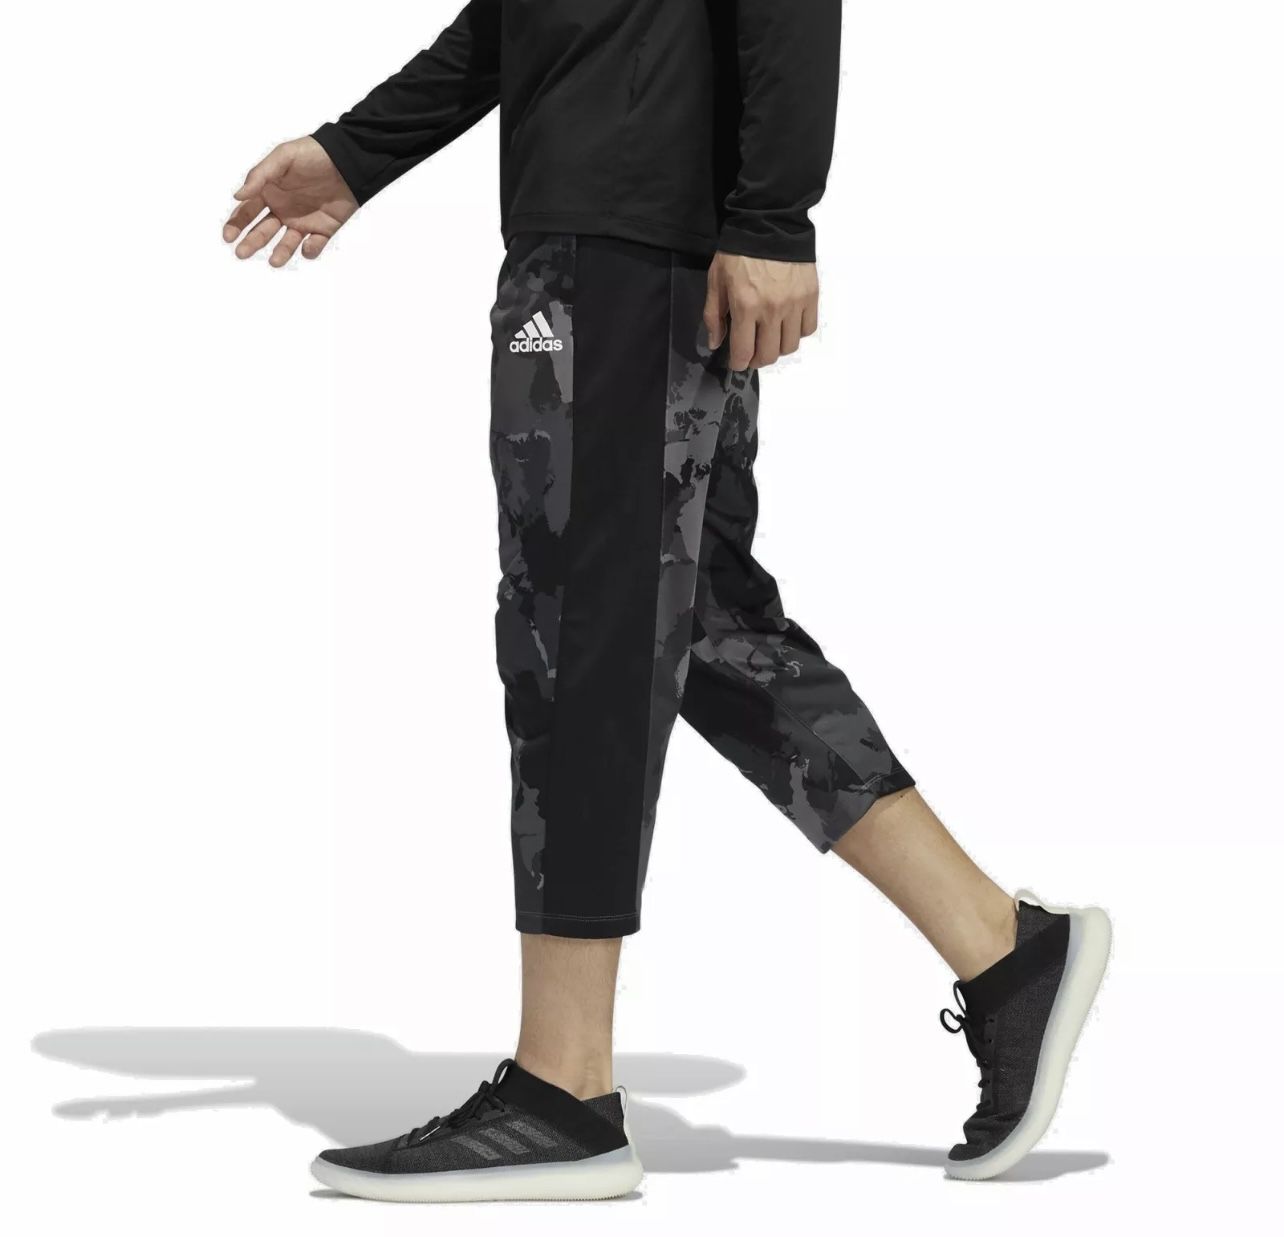 New Adidas Continental Camo City Cropped Pants Men's Athletic Bottoms GC8269